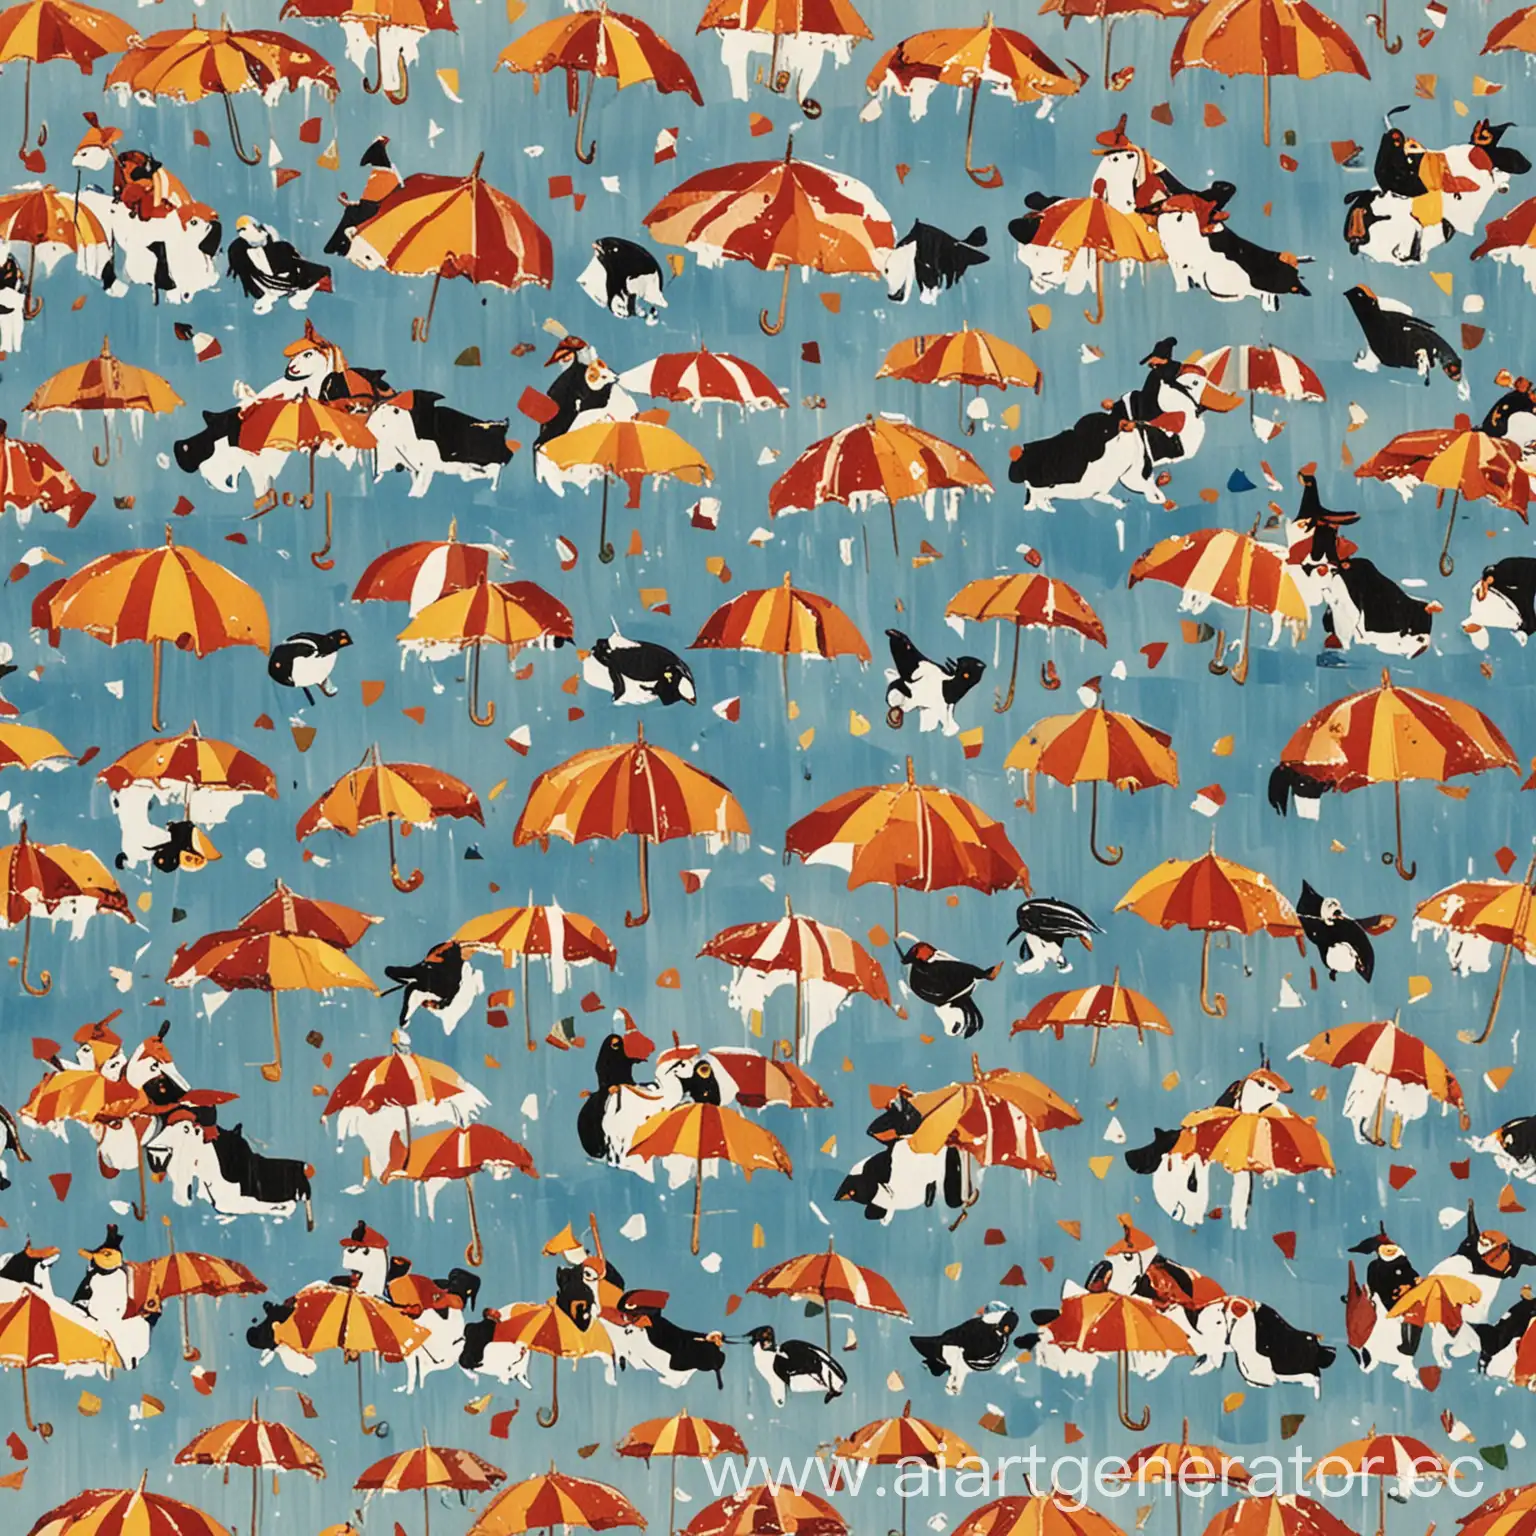 Vibrant-Flag-with-Flying-Cows-and-Penguins-Holding-Umbrellas